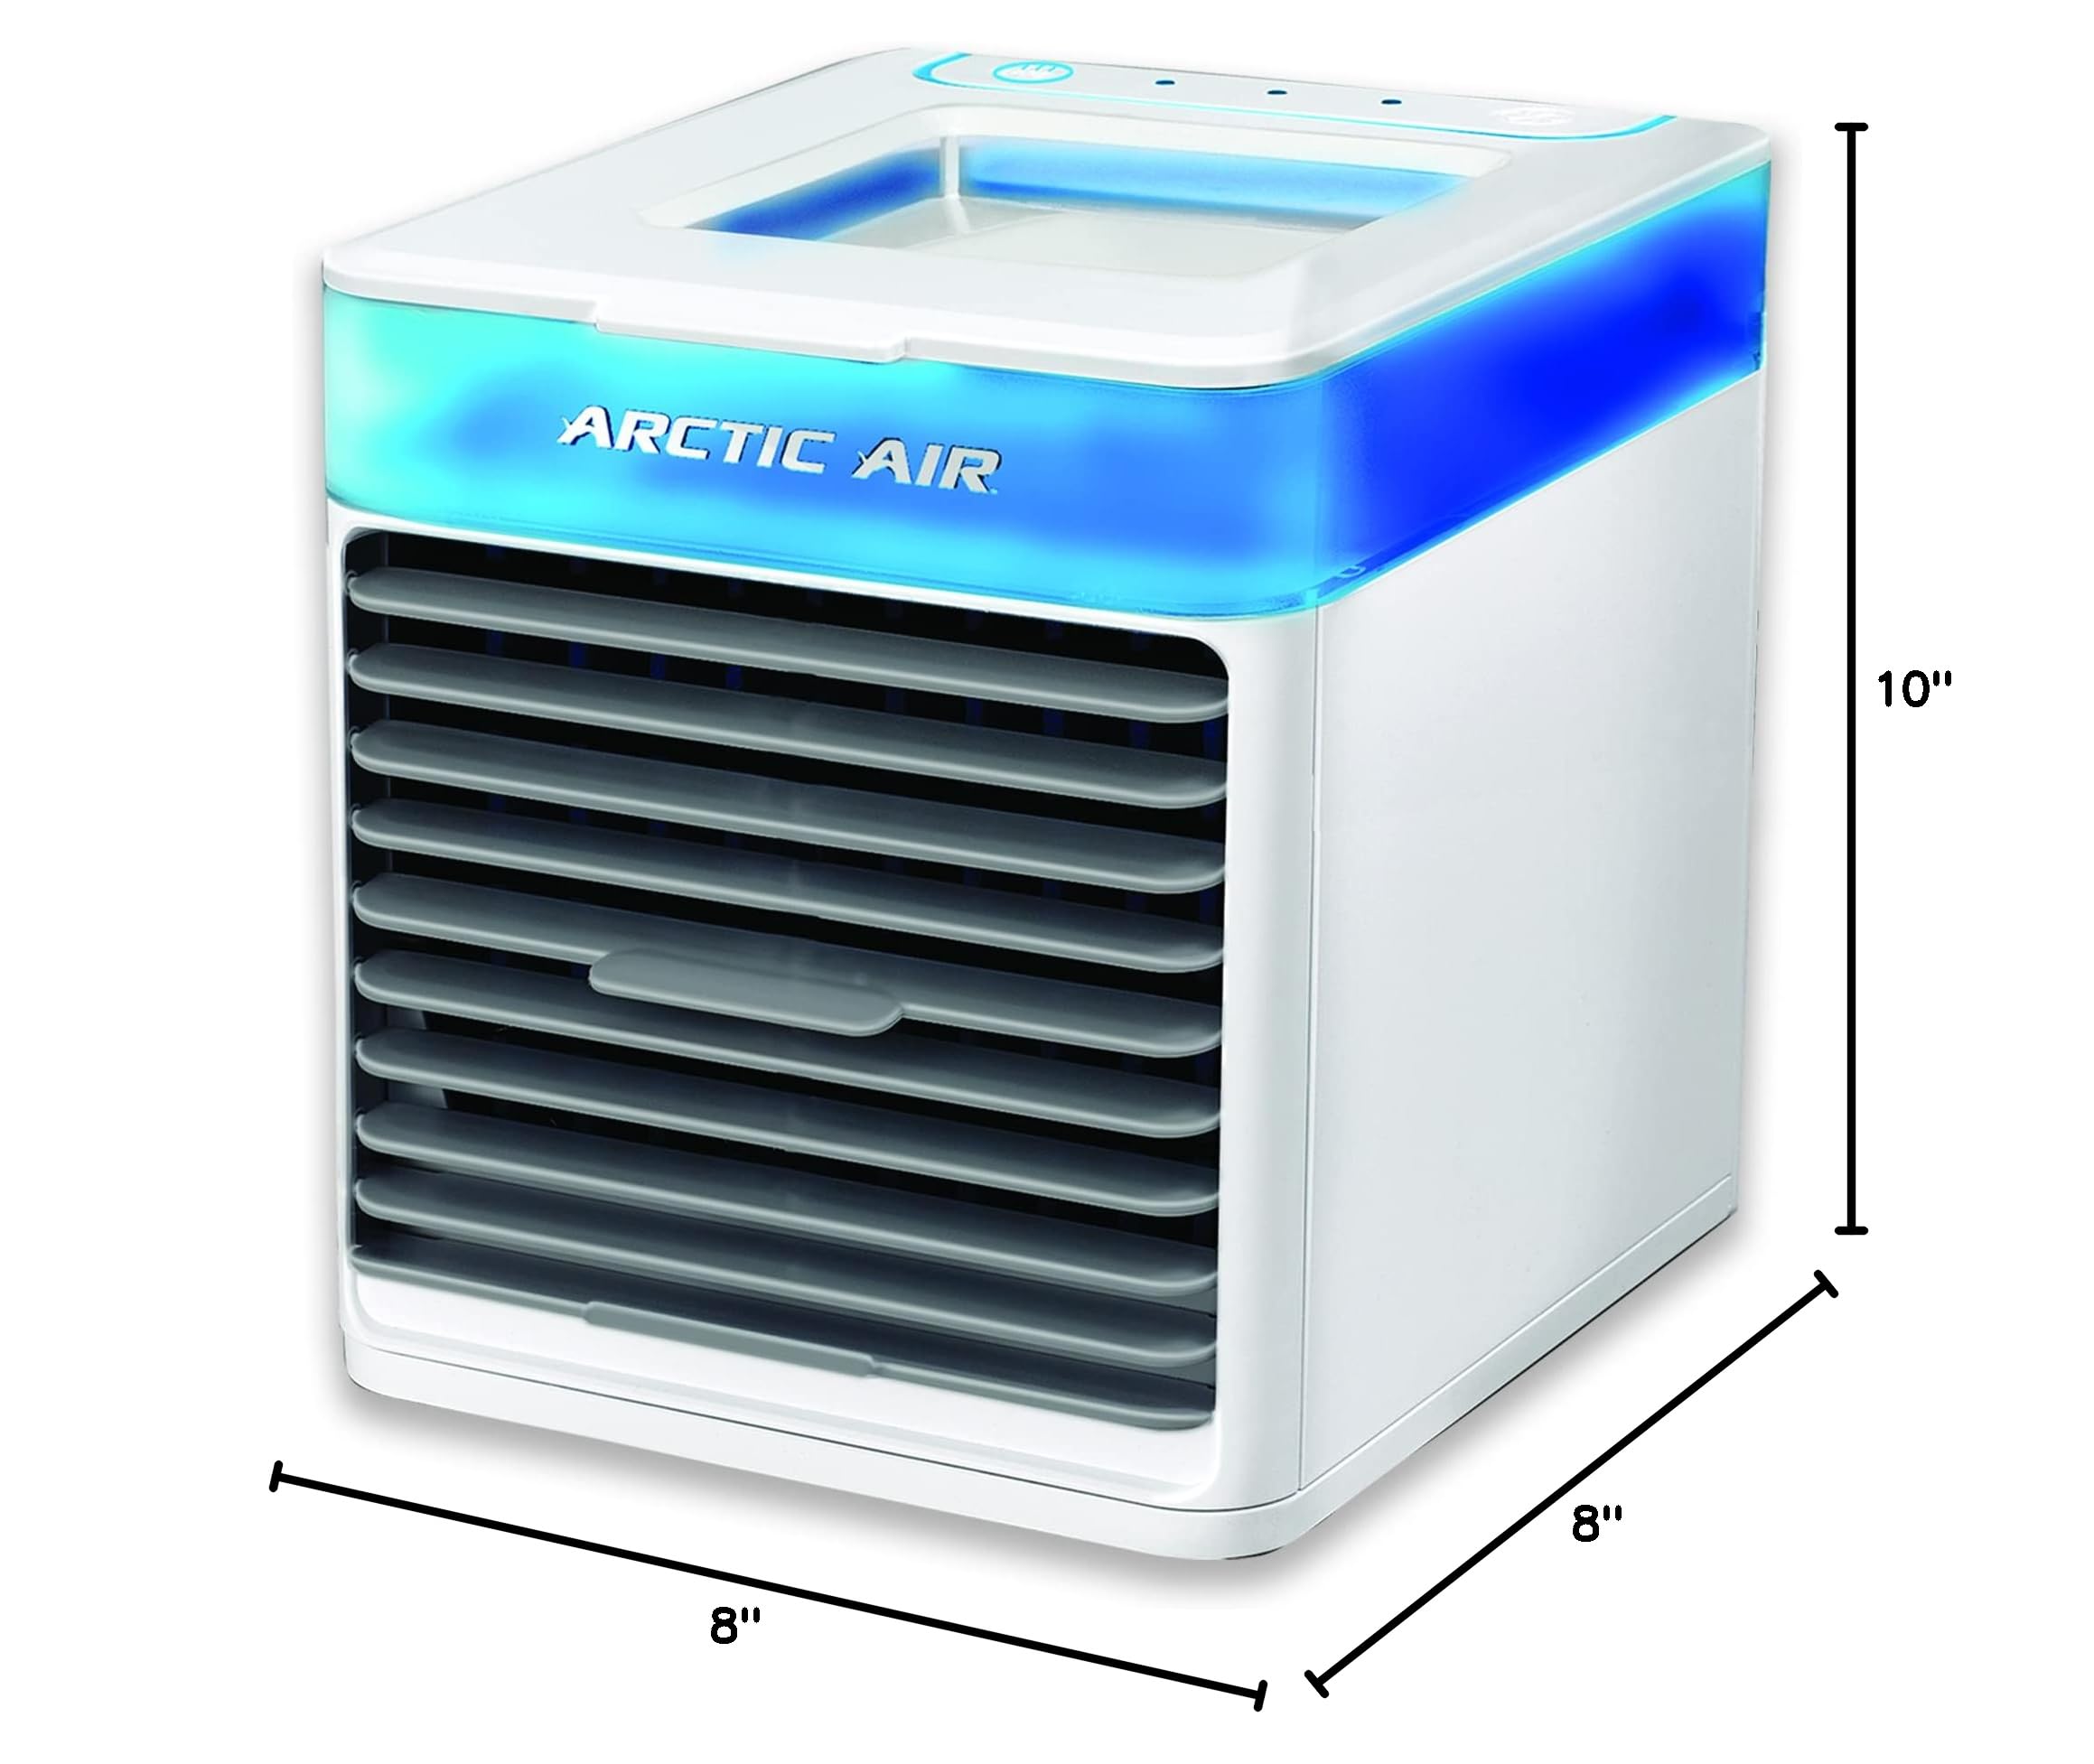 Arctic Air Pure Chill Evaporative Air Cooler By Ontel - Powerful 3-Speed Personal Space Cooler, Quiet, Lightweight And Portable For Bedroom, Office, Living Room & More